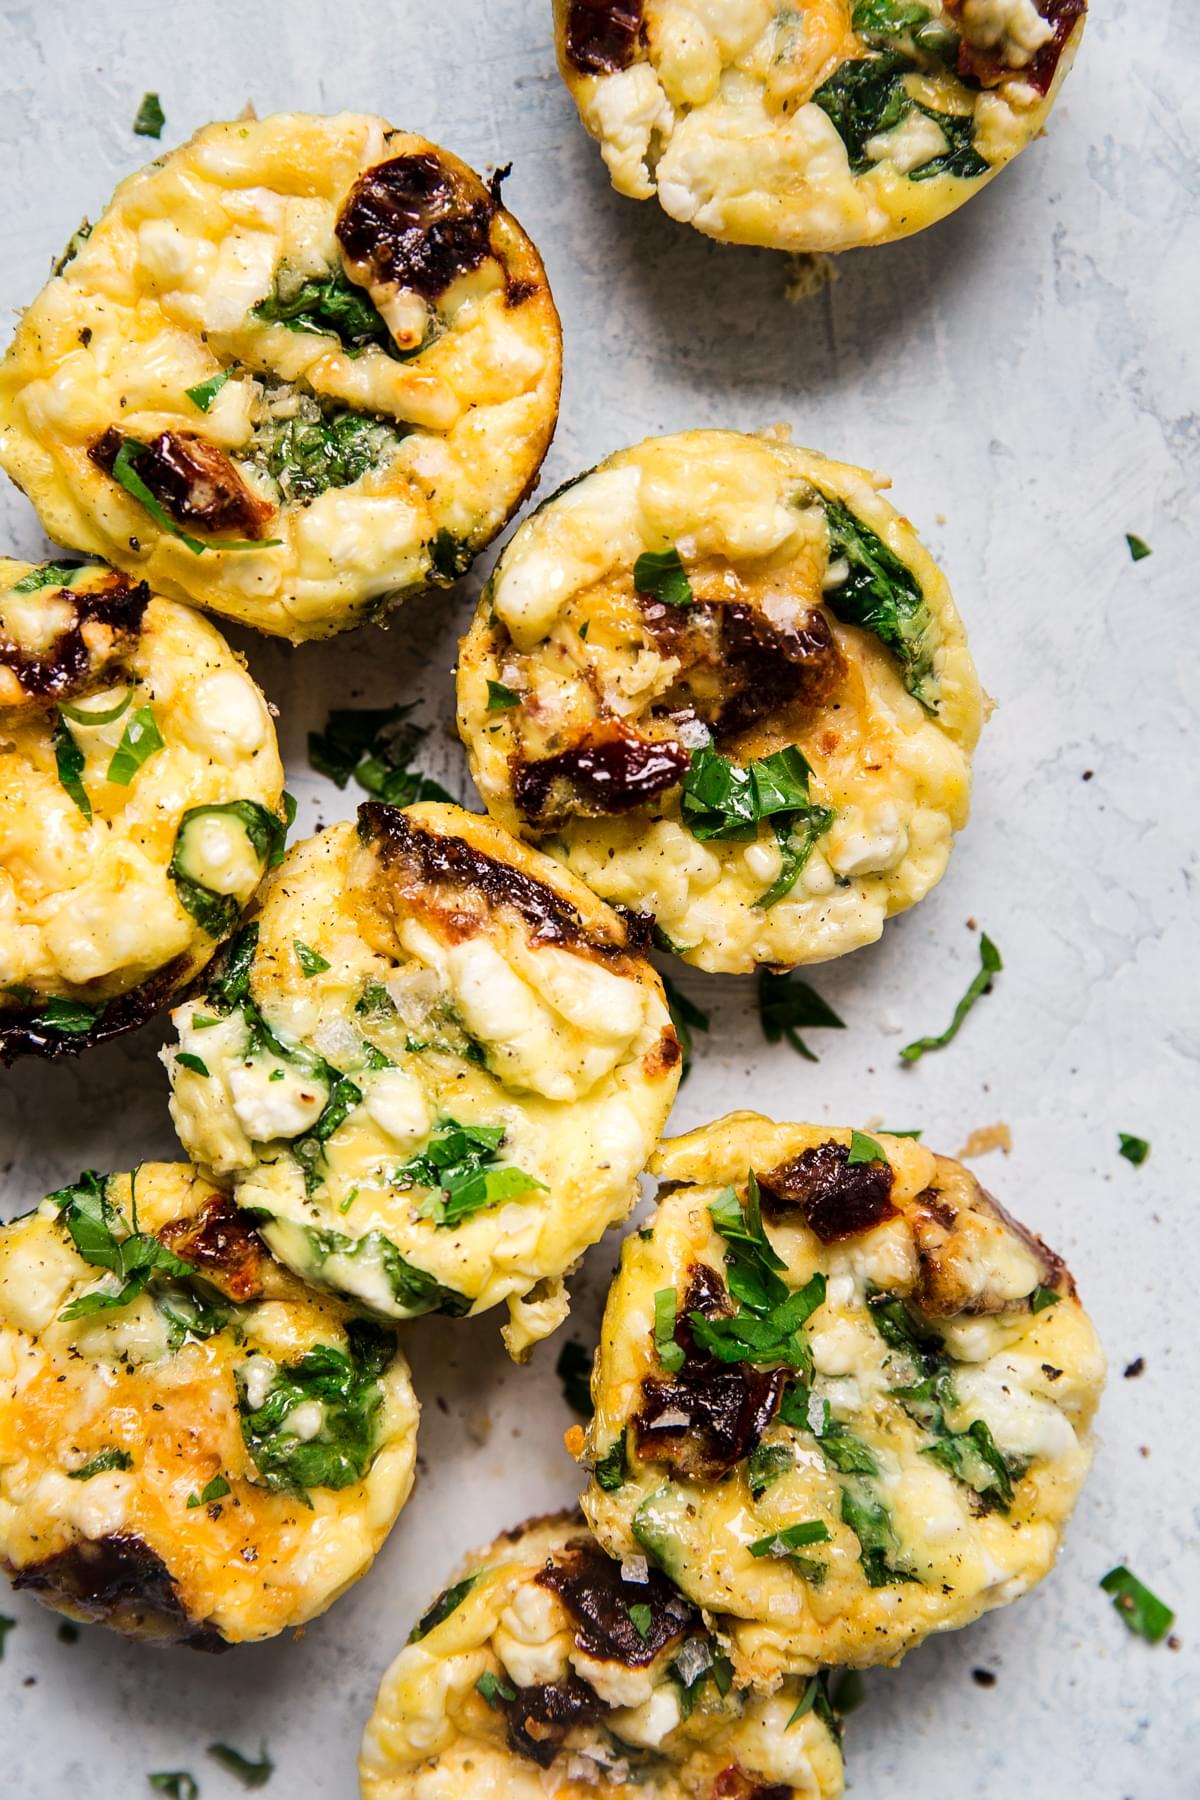 homemade egg cups on a serving board made with feta, spinach and sun-dried tomatoes